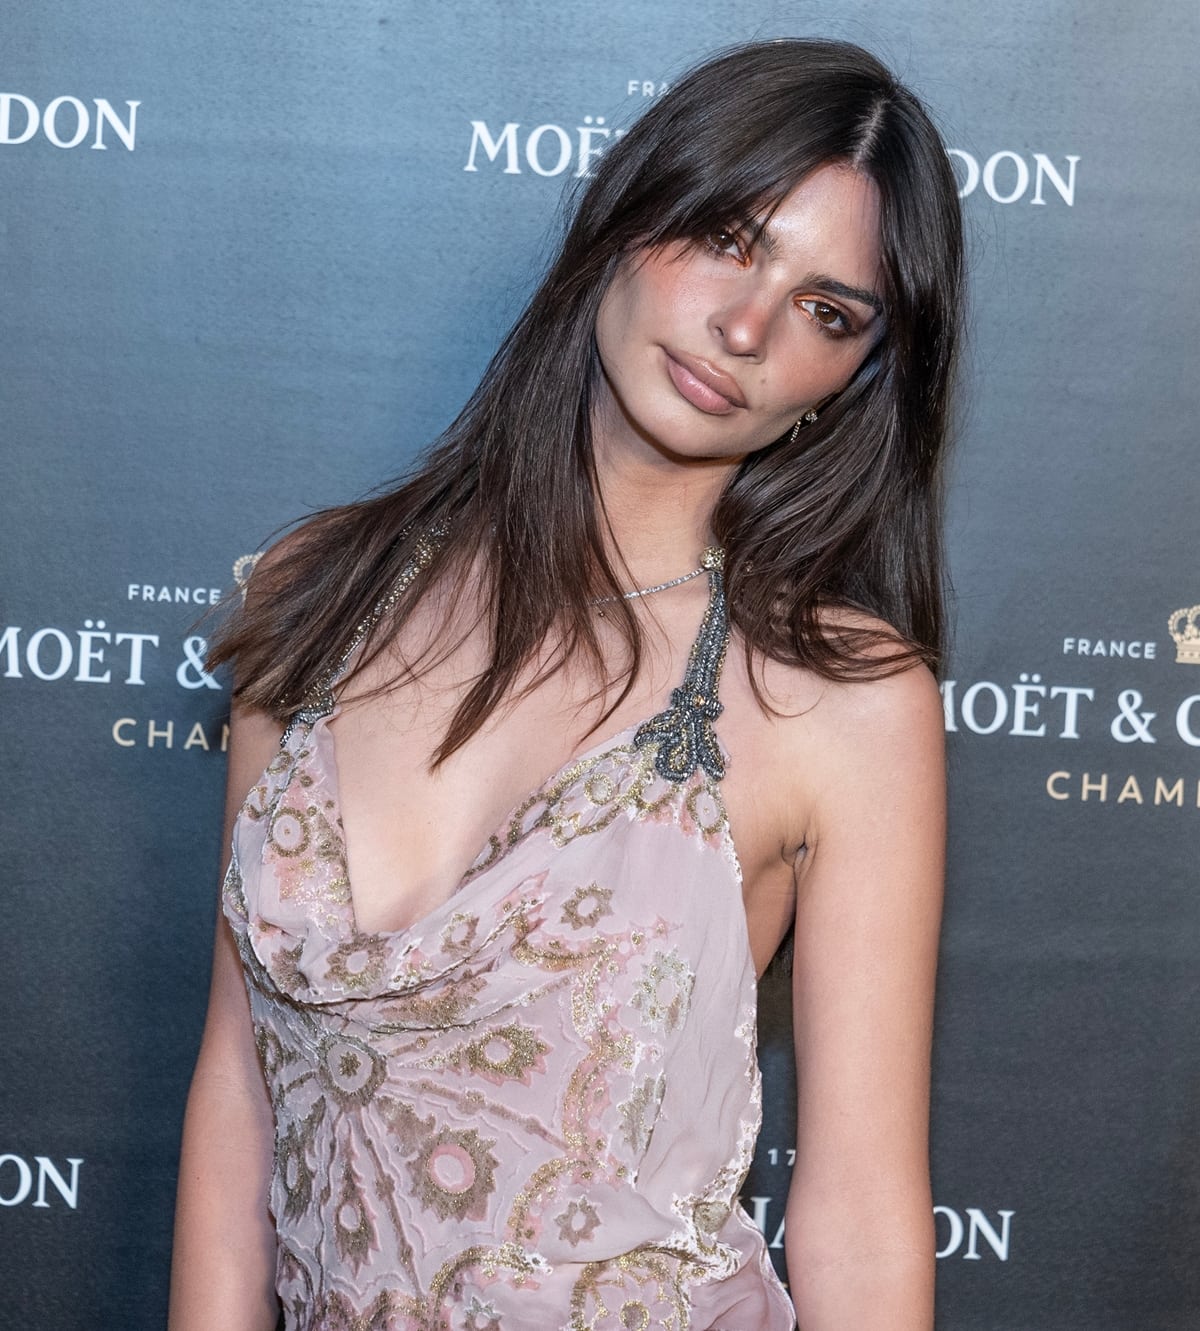 Emily Ratajkowski made a stylish entrance at the Moet and Chandon's Holiday Season Celebration in New York City in an eye-catching pink-and-burgundy satin dress